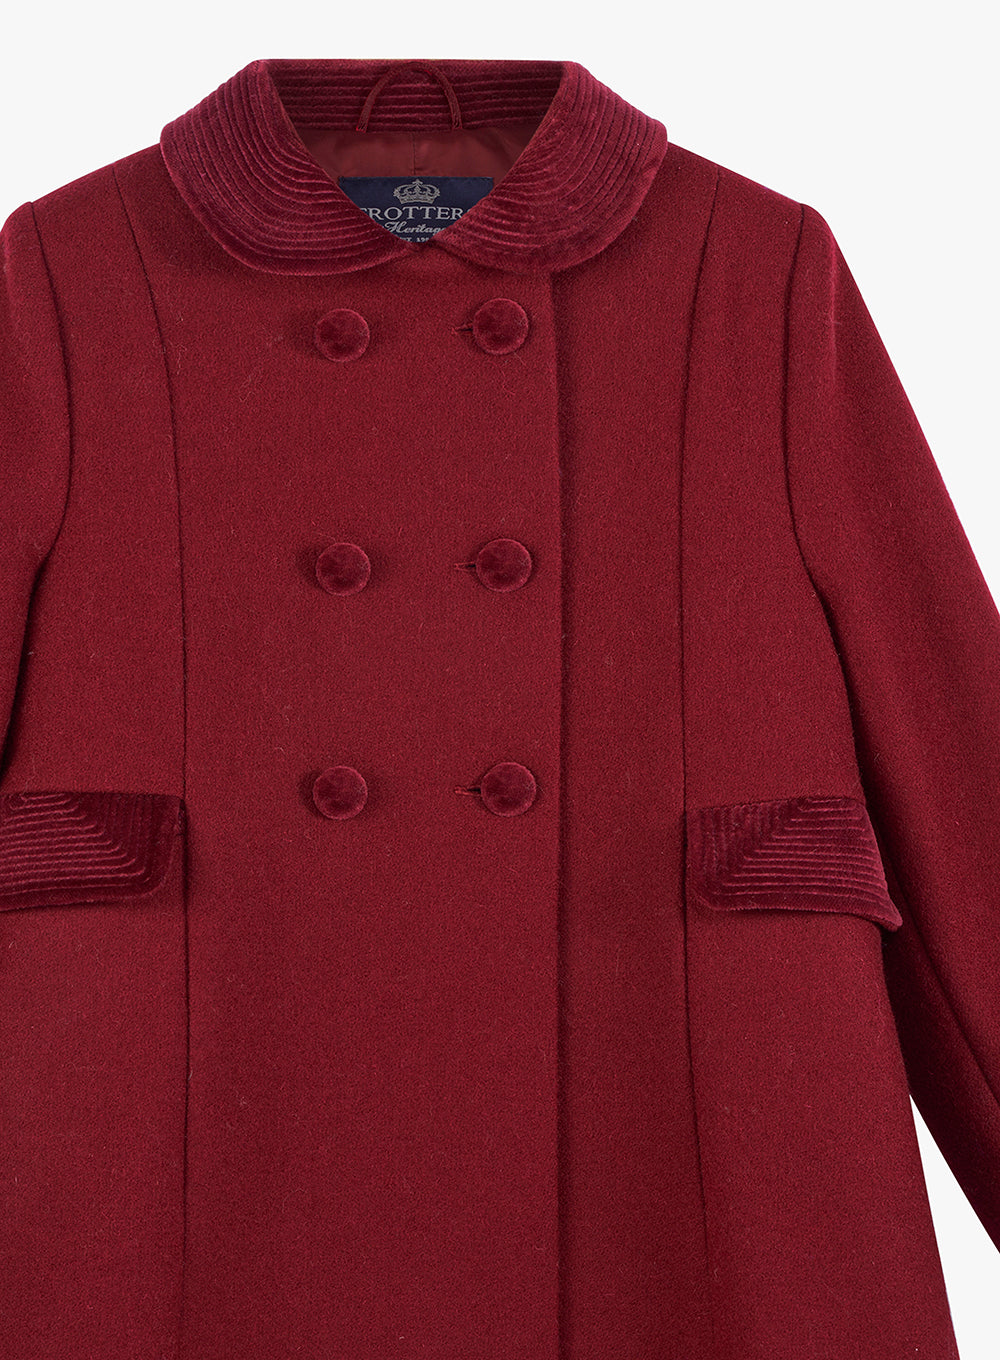 Trotters Heritage Girls' Classic Coat in Burgundy | Trotters London ...